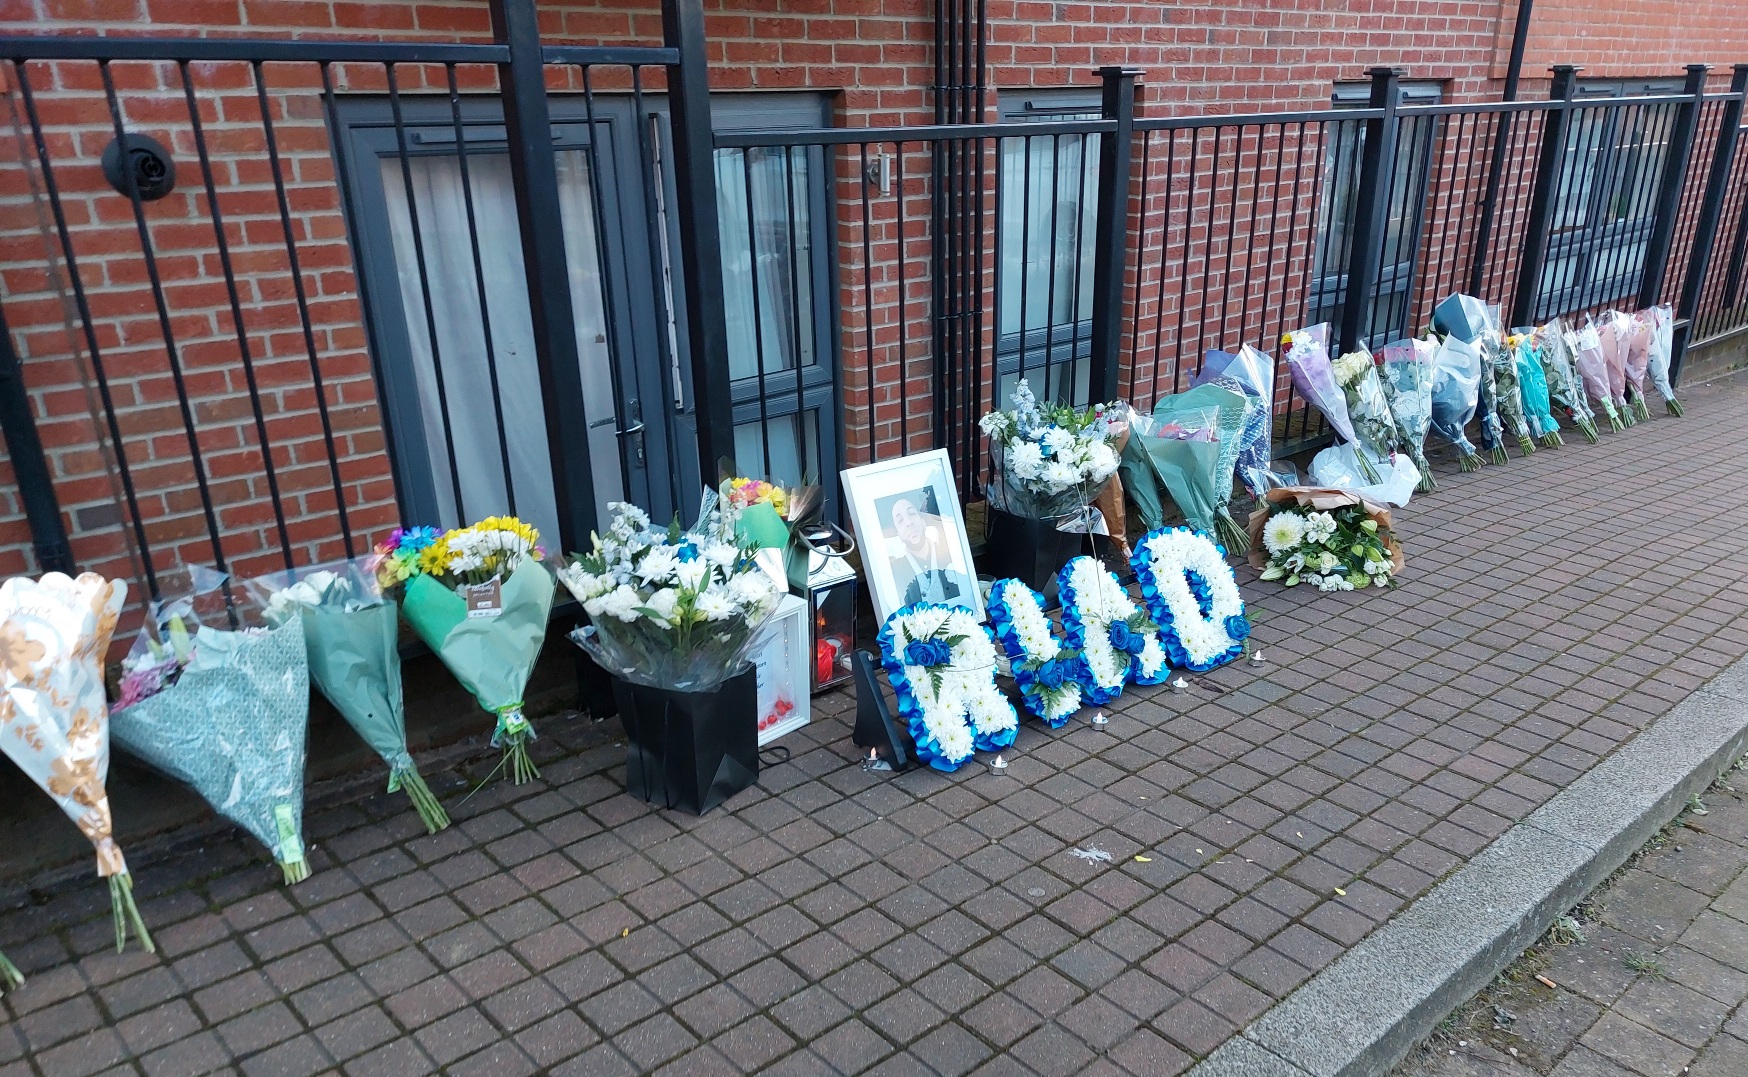 Family and friends laid Tributes